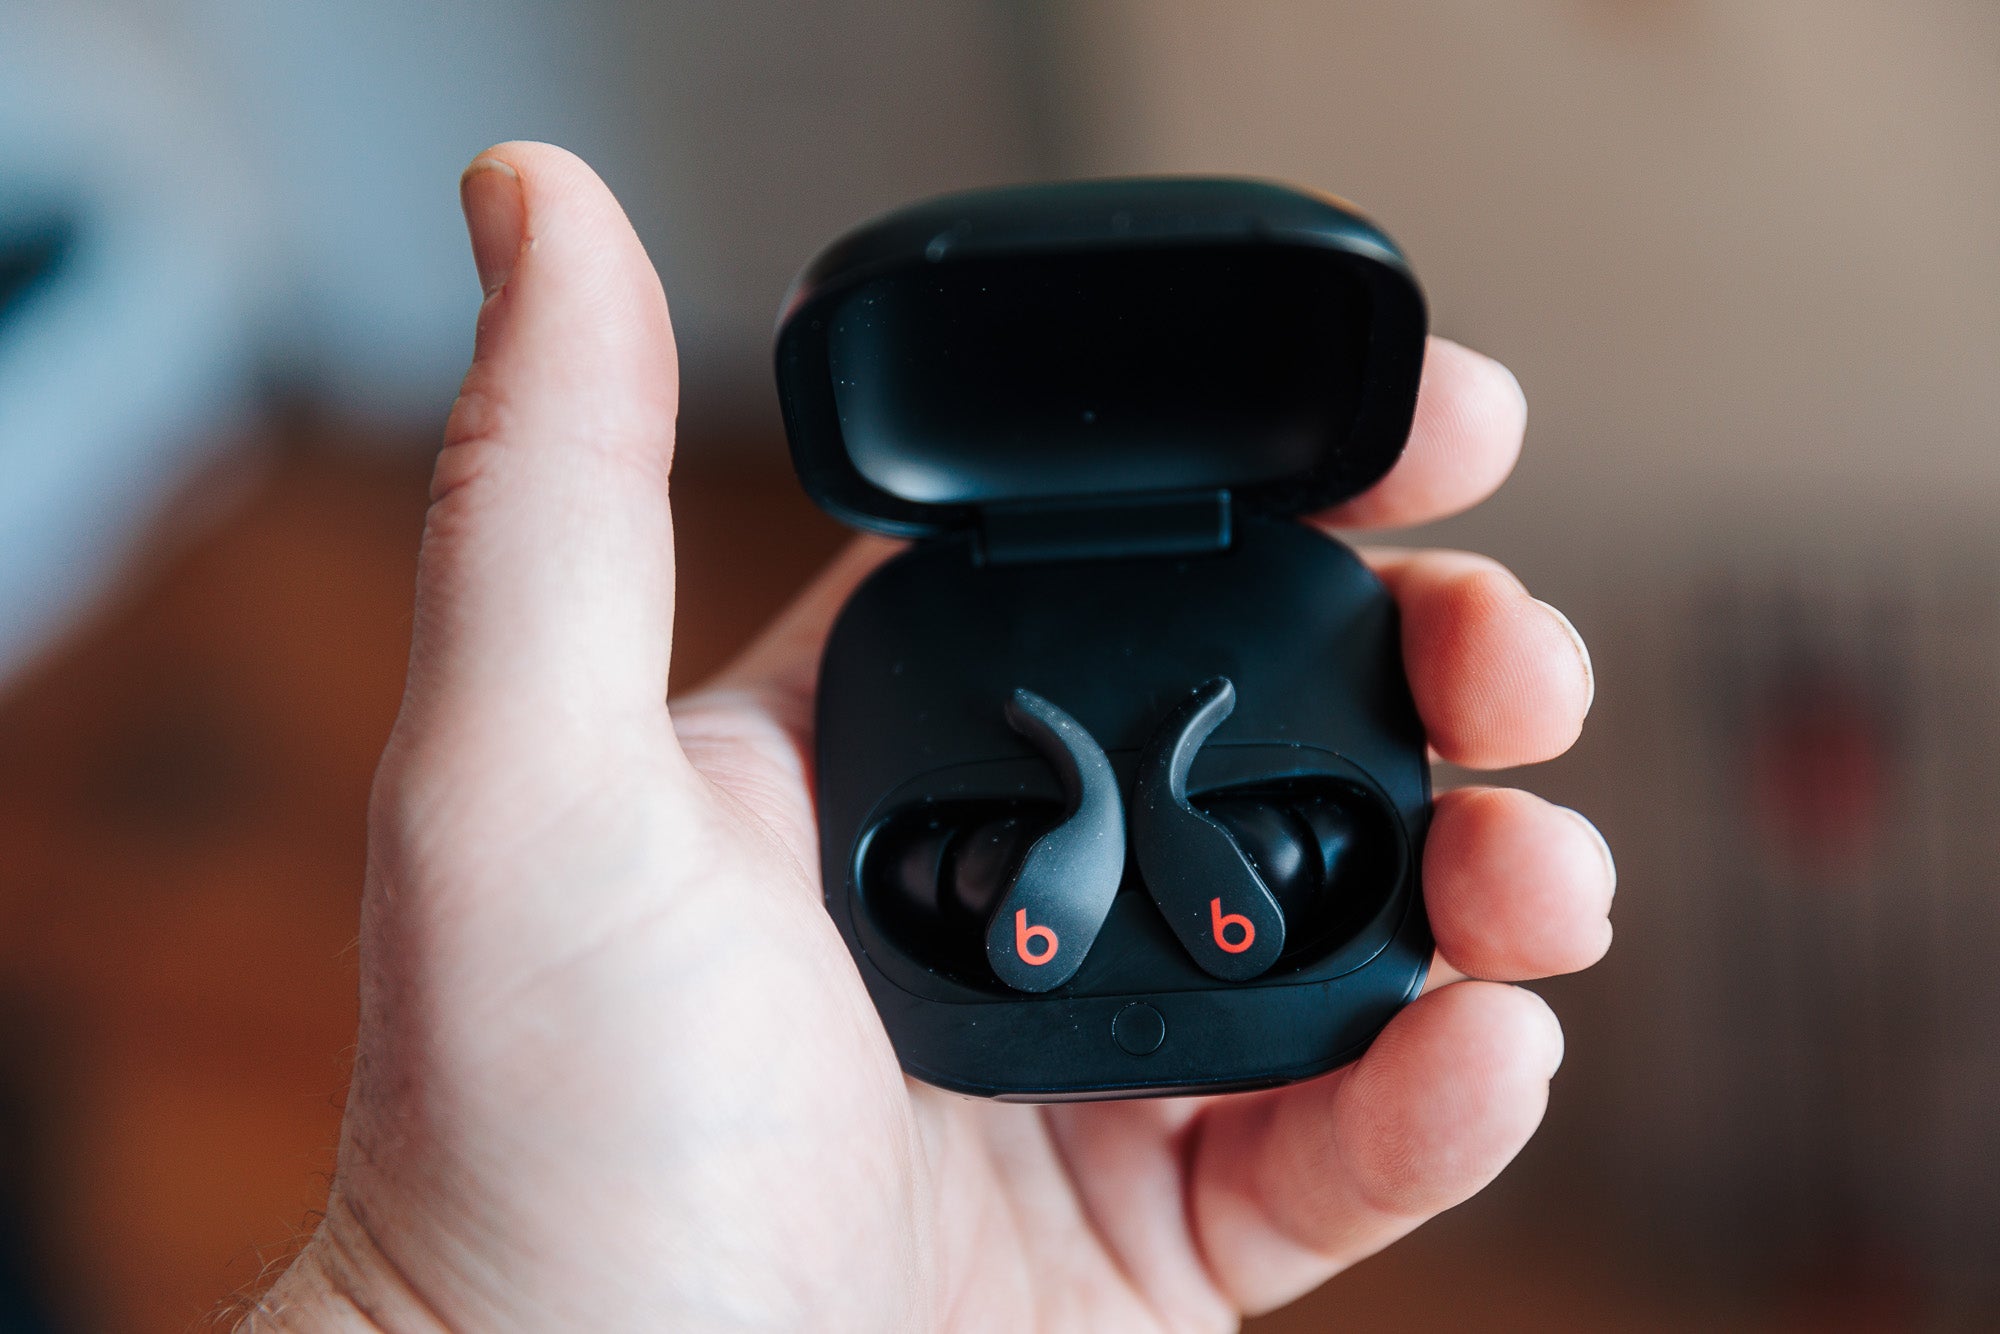 Beats Fit Pro true wi-fi earbuds assessment: Strong performers